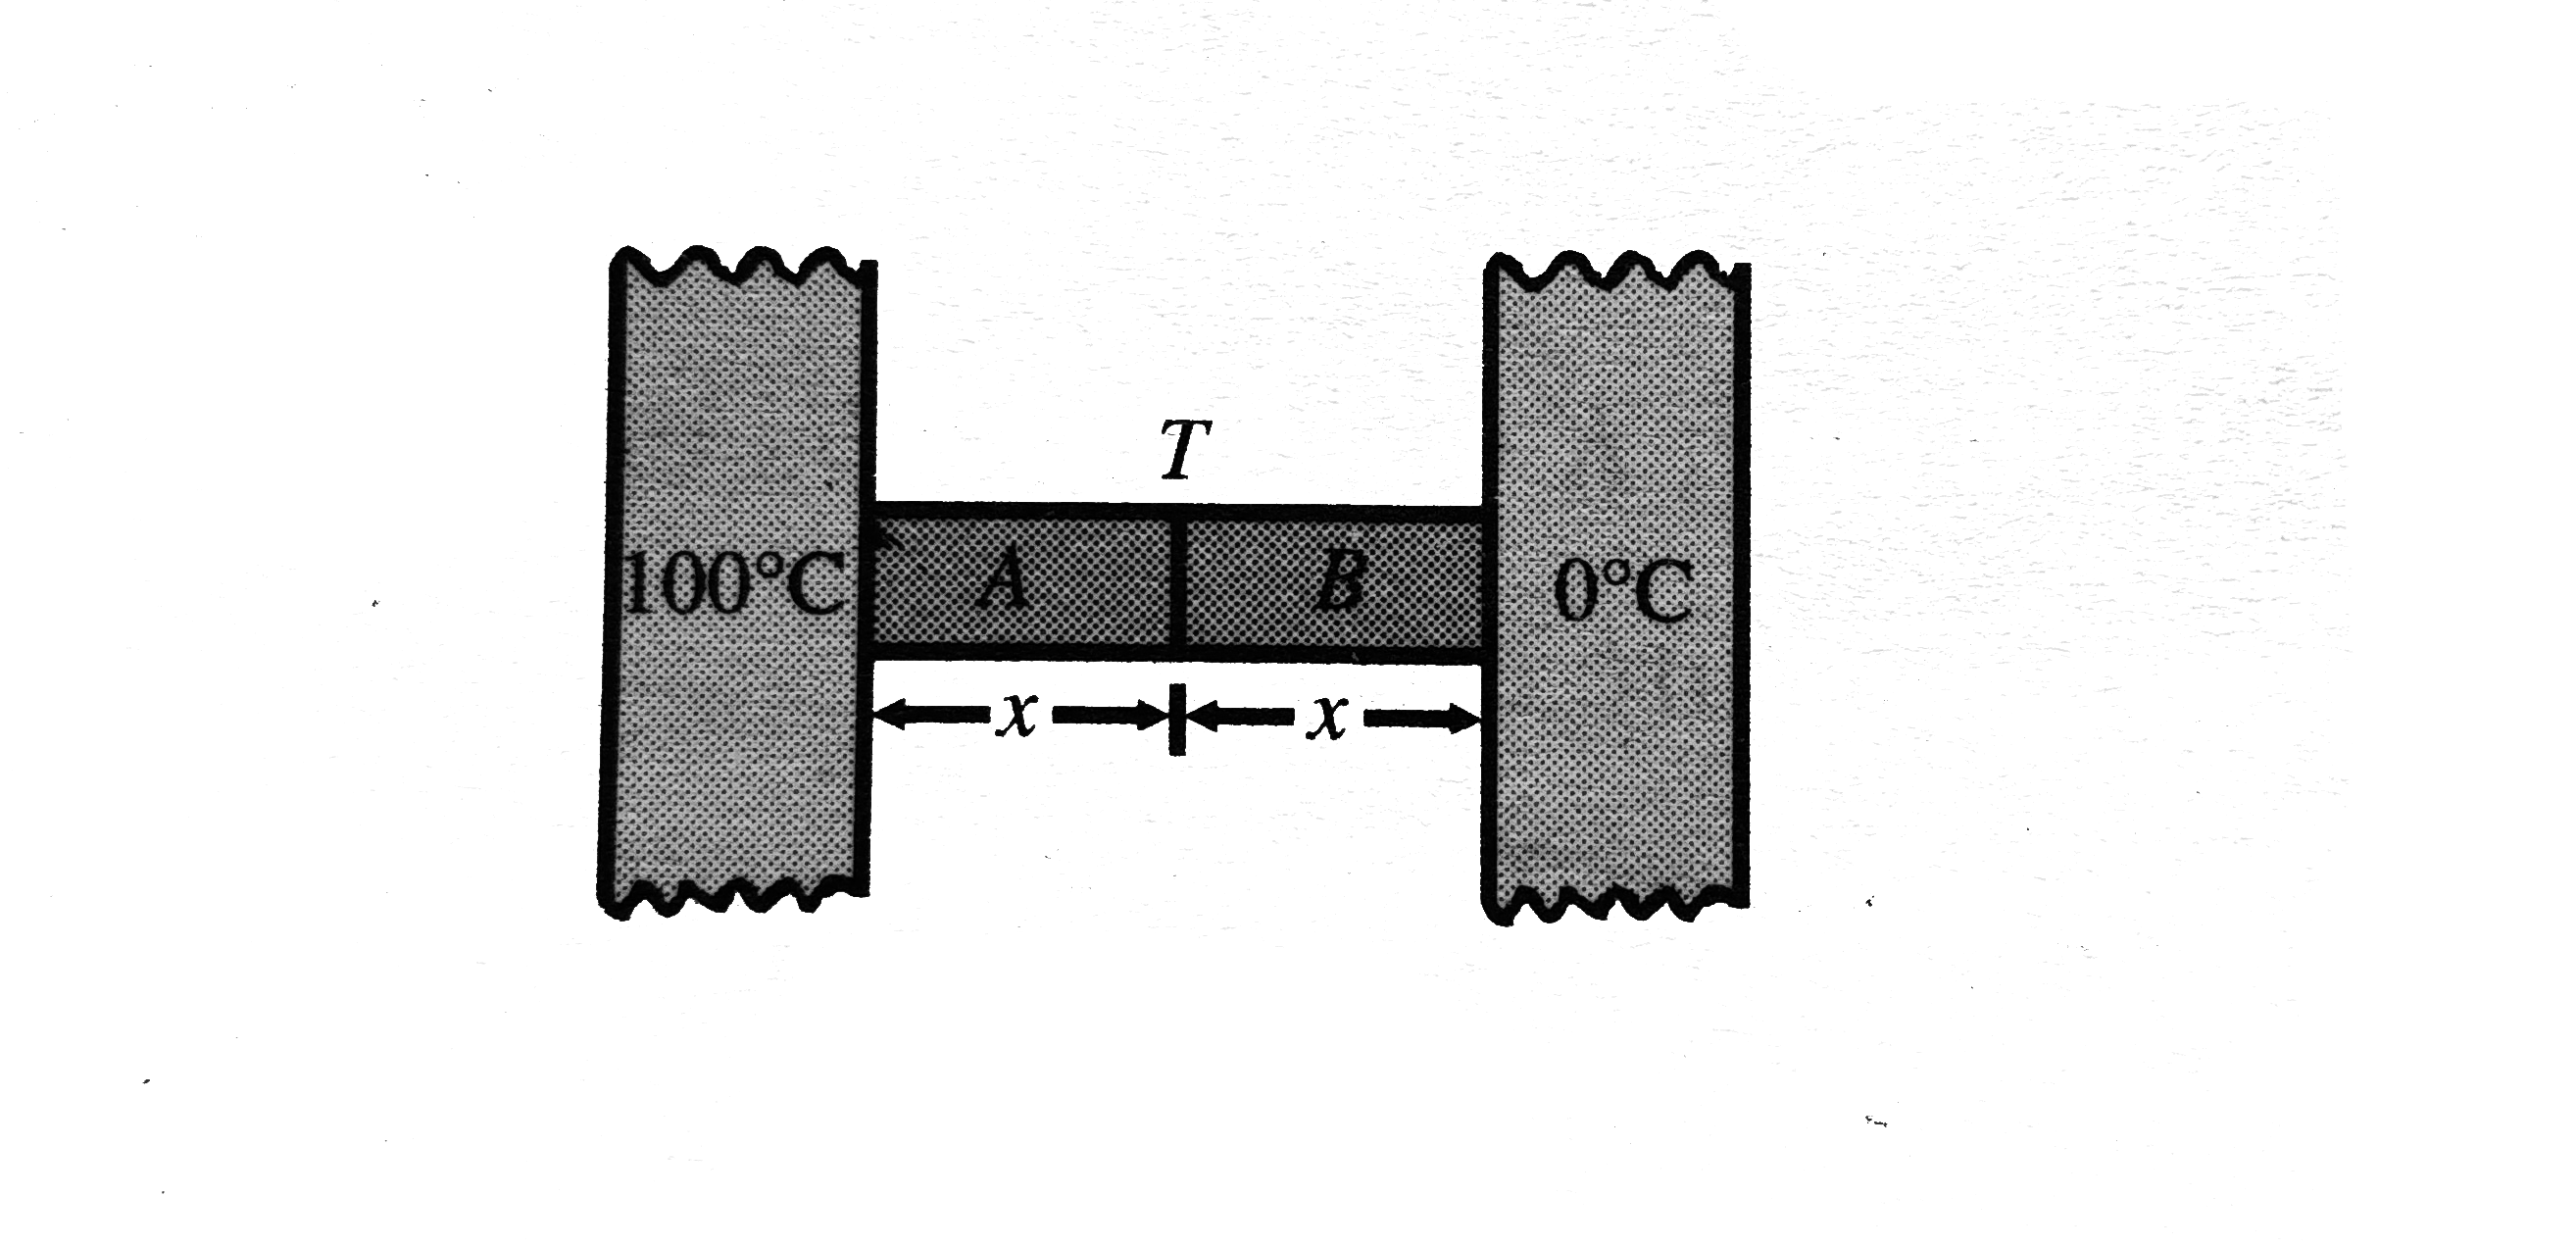 Two metal cubes A and B of same size are arranged as shown if Fig. The extreme ends of the combination are maintained at the identical temperatures. The arrangement is thermally insulated. The coefficients of thermal conductivity of A and B are 300W//m^@C and 200 W//m^@C, respectively. After steady state is reached, what will be the temperature T of the interface ?